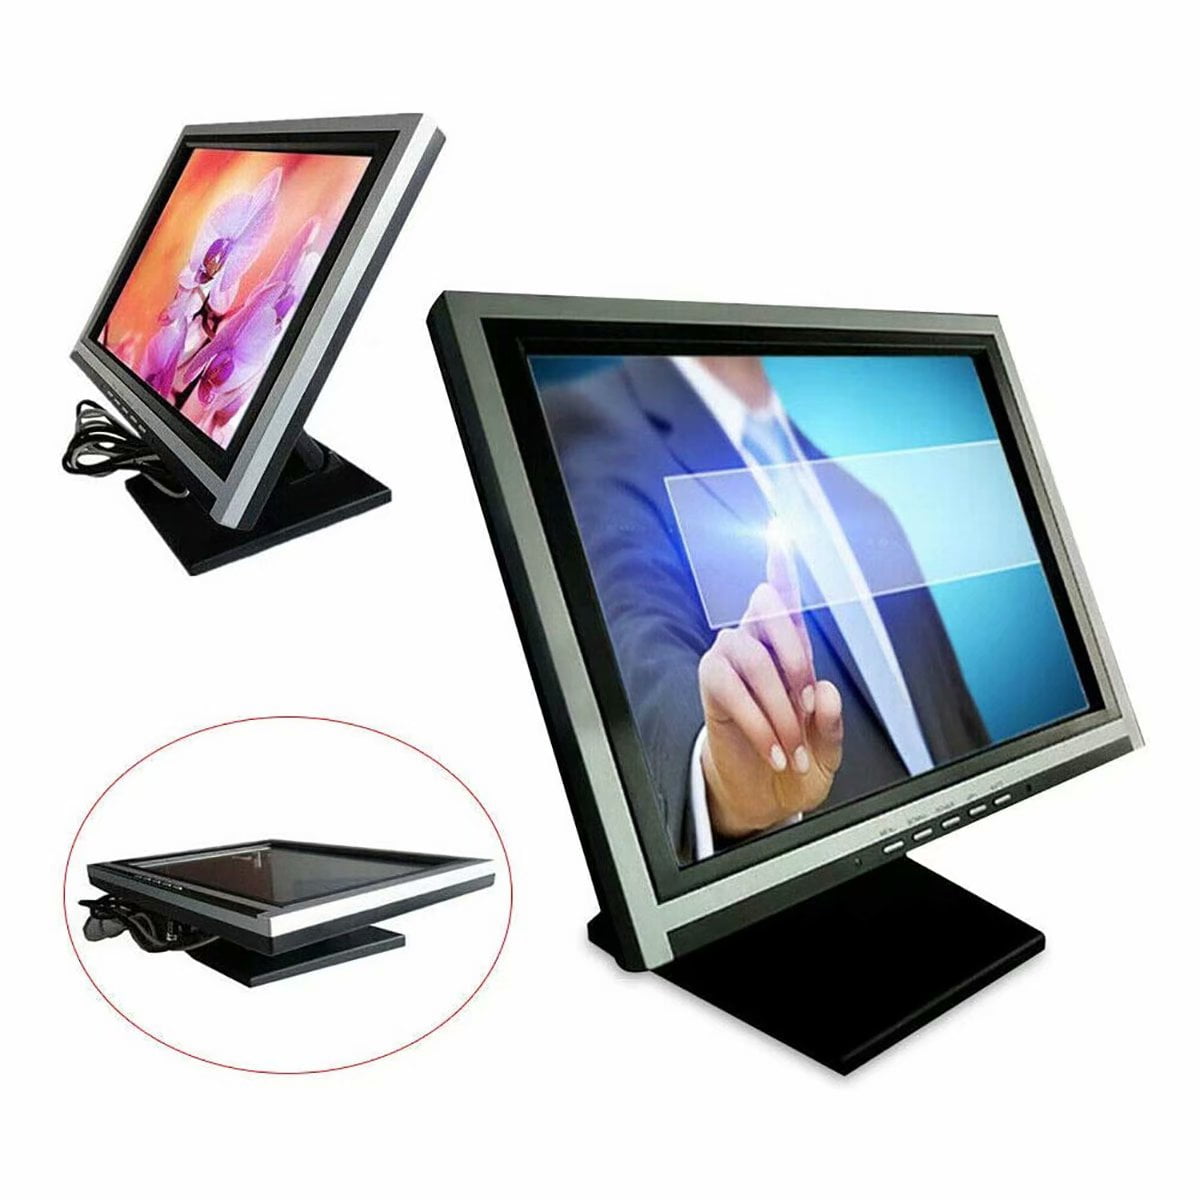 Fujitsu Touch Display Touchscreen PV755AAT Seriell 15" 38,1 cm Monitor 